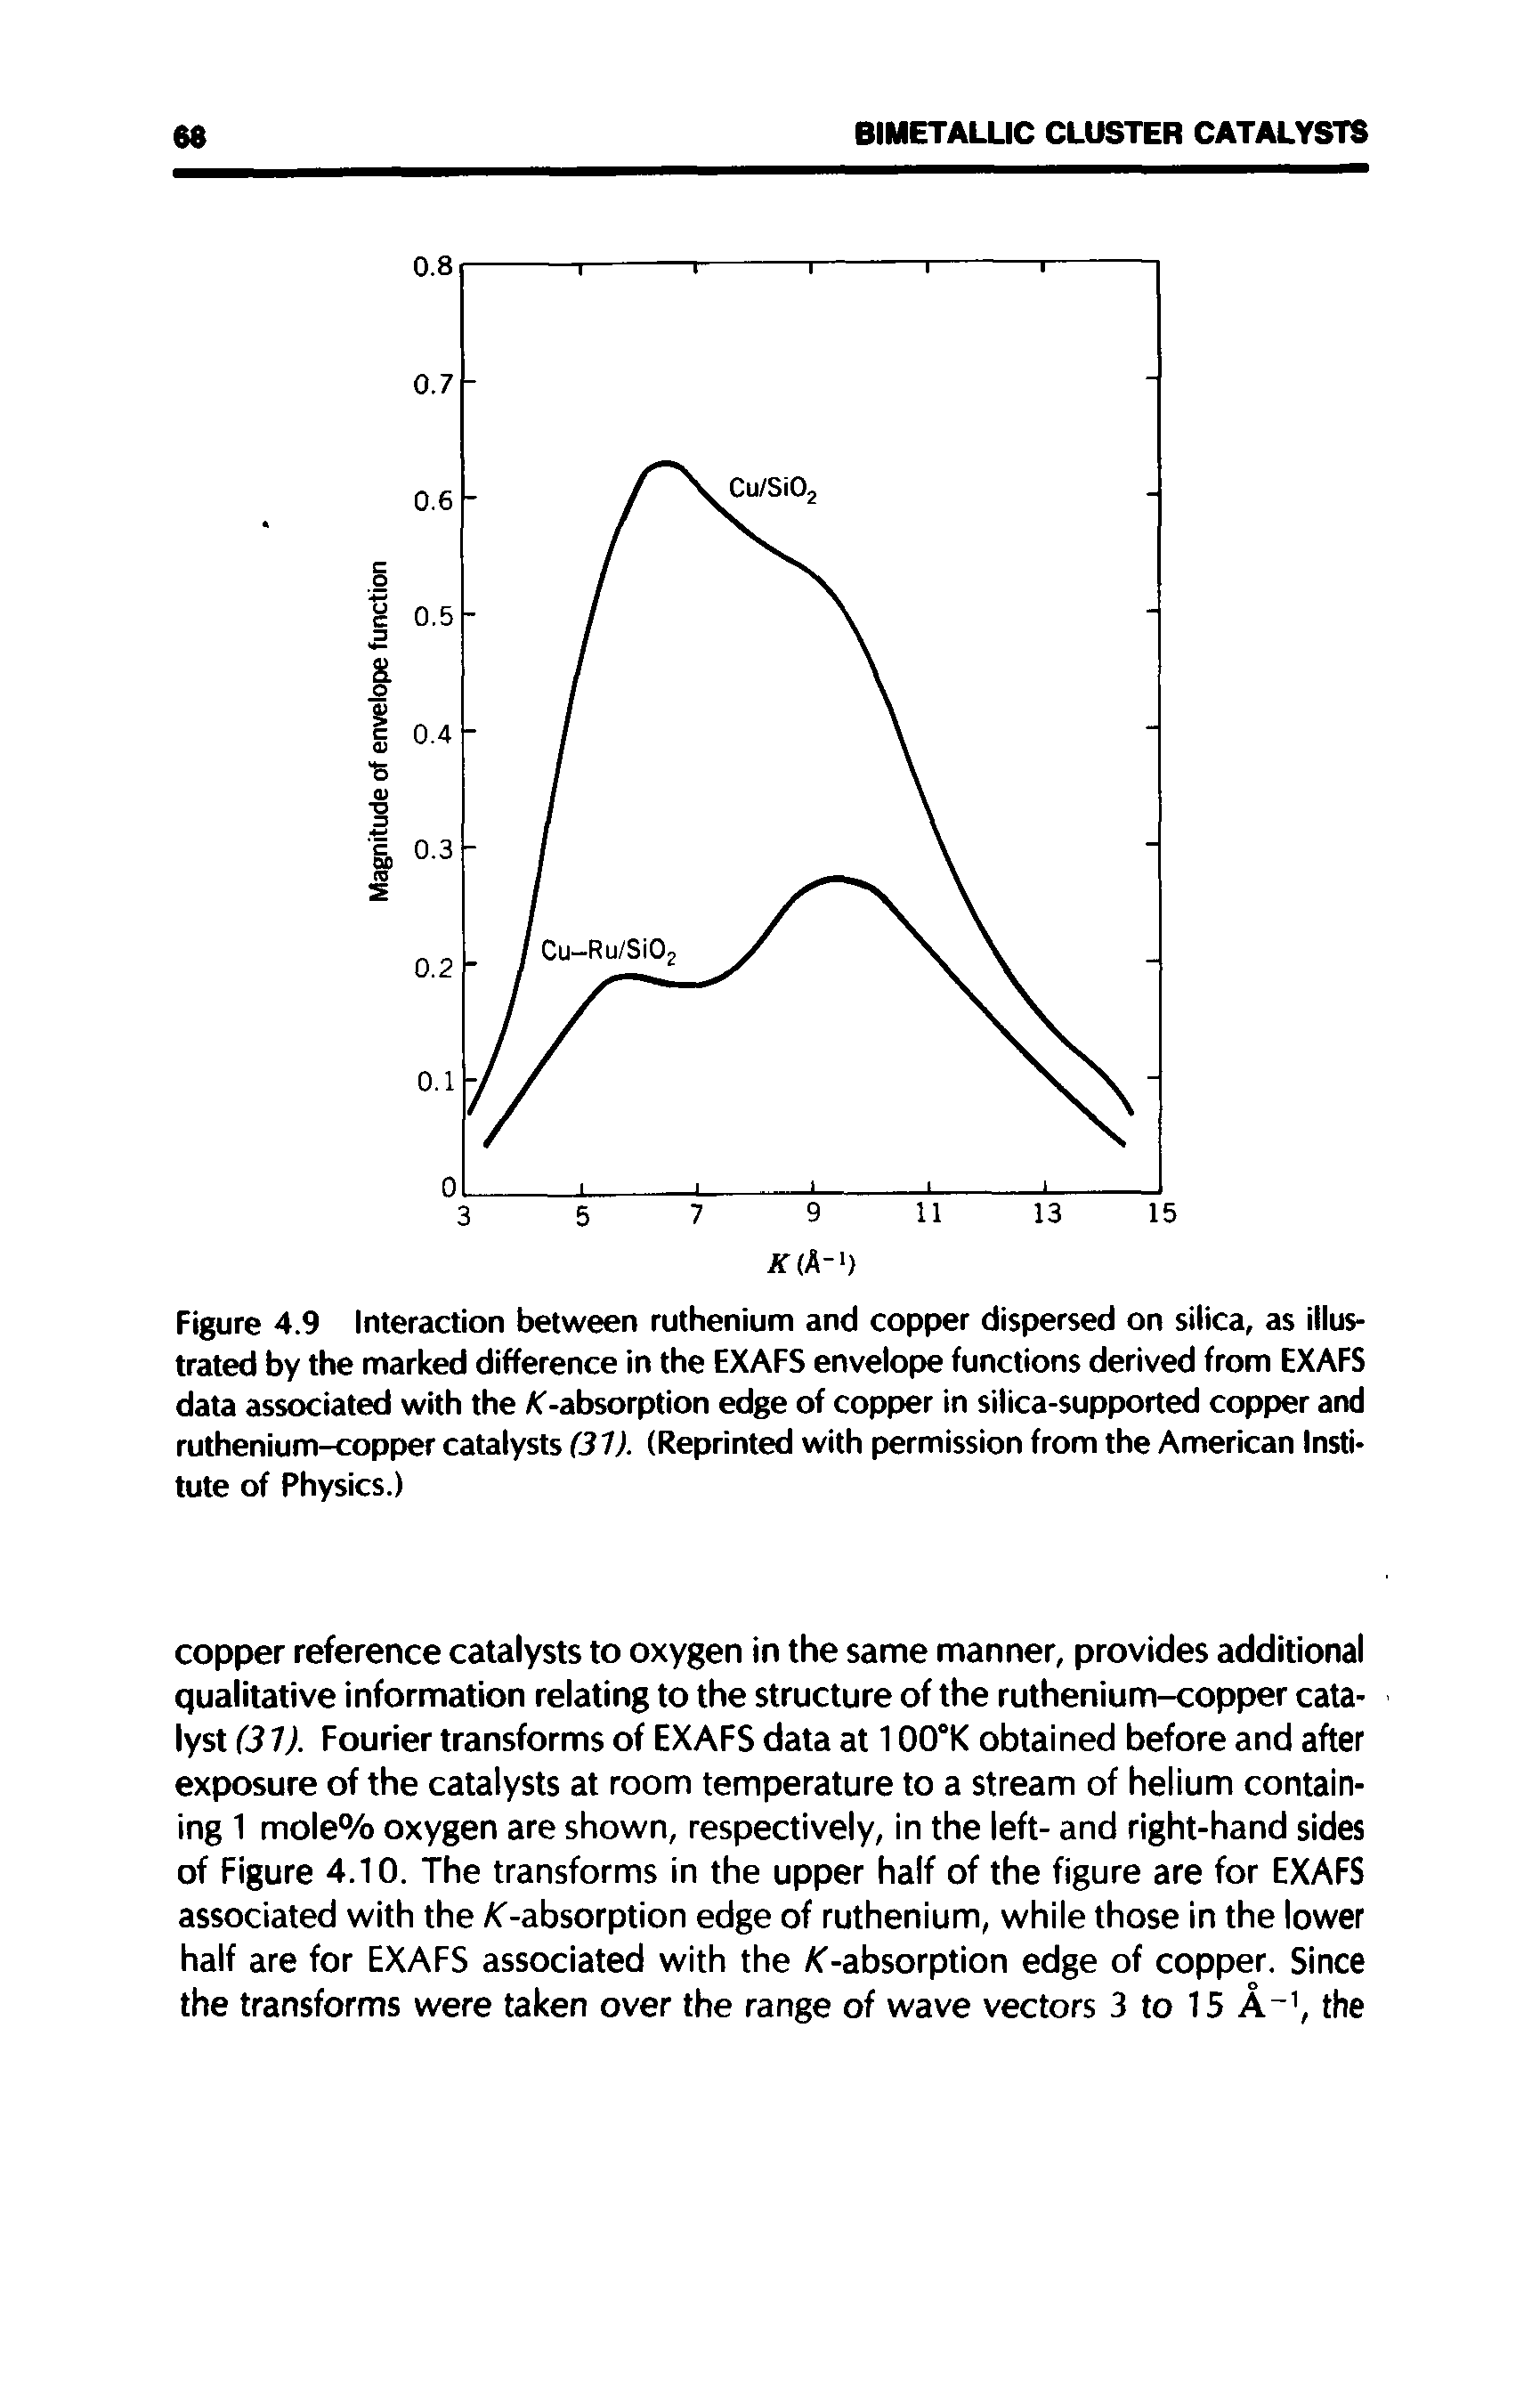 Figure 4.9 Interaction between ruthenium and copper dispersed on silica, as illustrated by the marked difference in the EXAFS envelope functions derived from EXAFS data associated with the K-absorption edge of copper in silica-supported copper and ruthenium-copper catalysts (31). (Reprinted with permission from the American Institute of Physics.)...